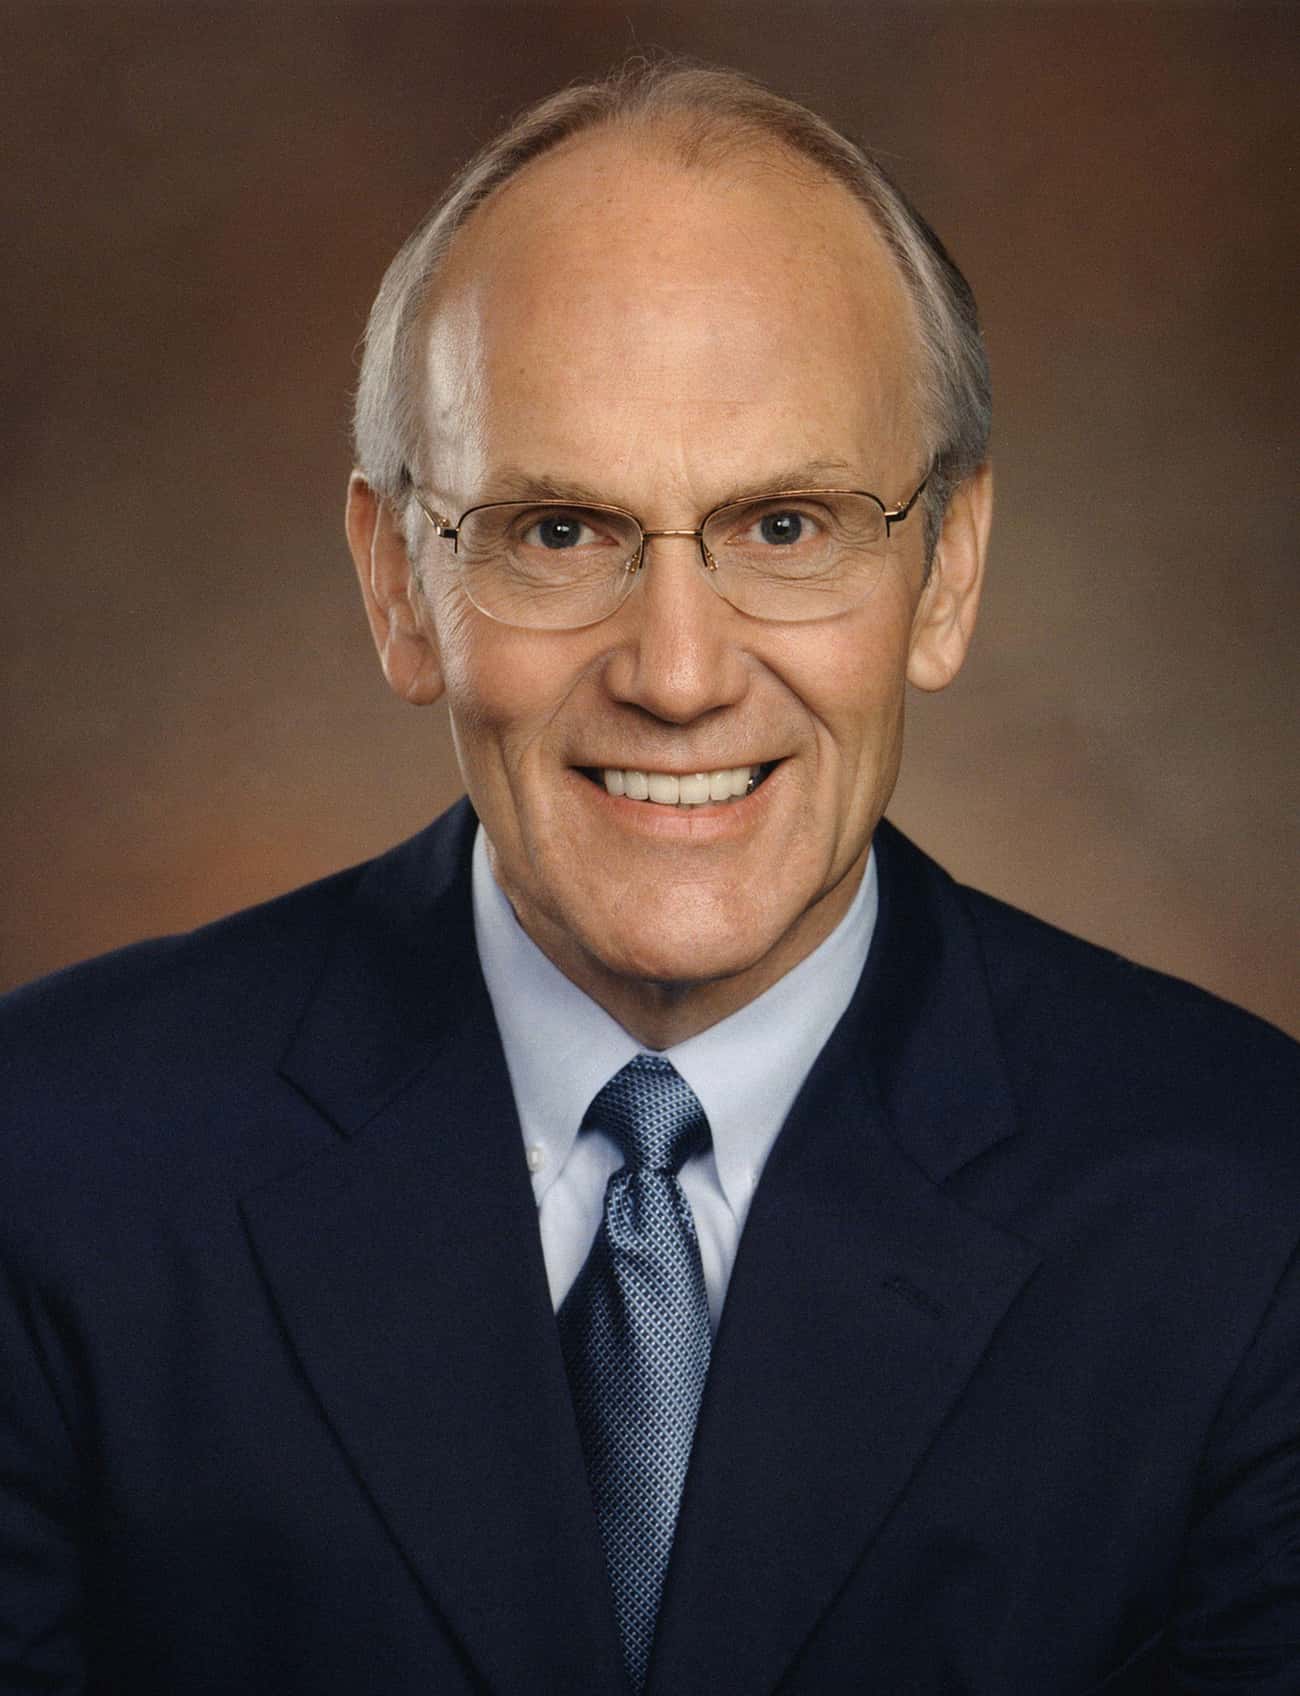 Larry Craig Went From Bathroom Hookups To Consulting